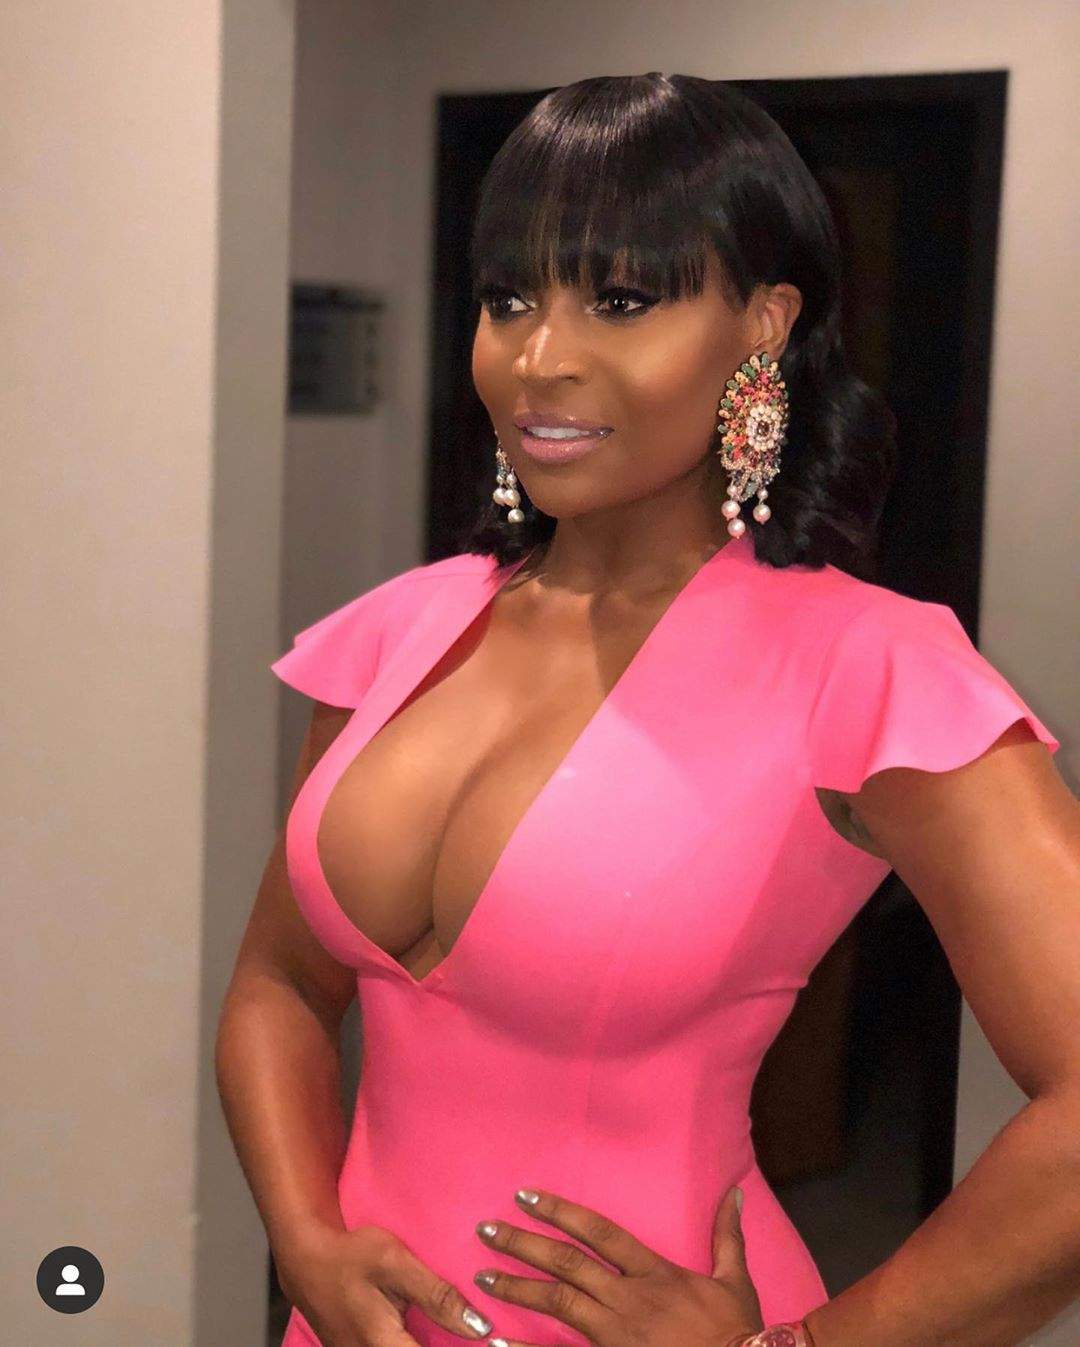 SMASH Or PASS? Reality Star Poses Completely Naked To Celebrate 44th Birthday (Photos)